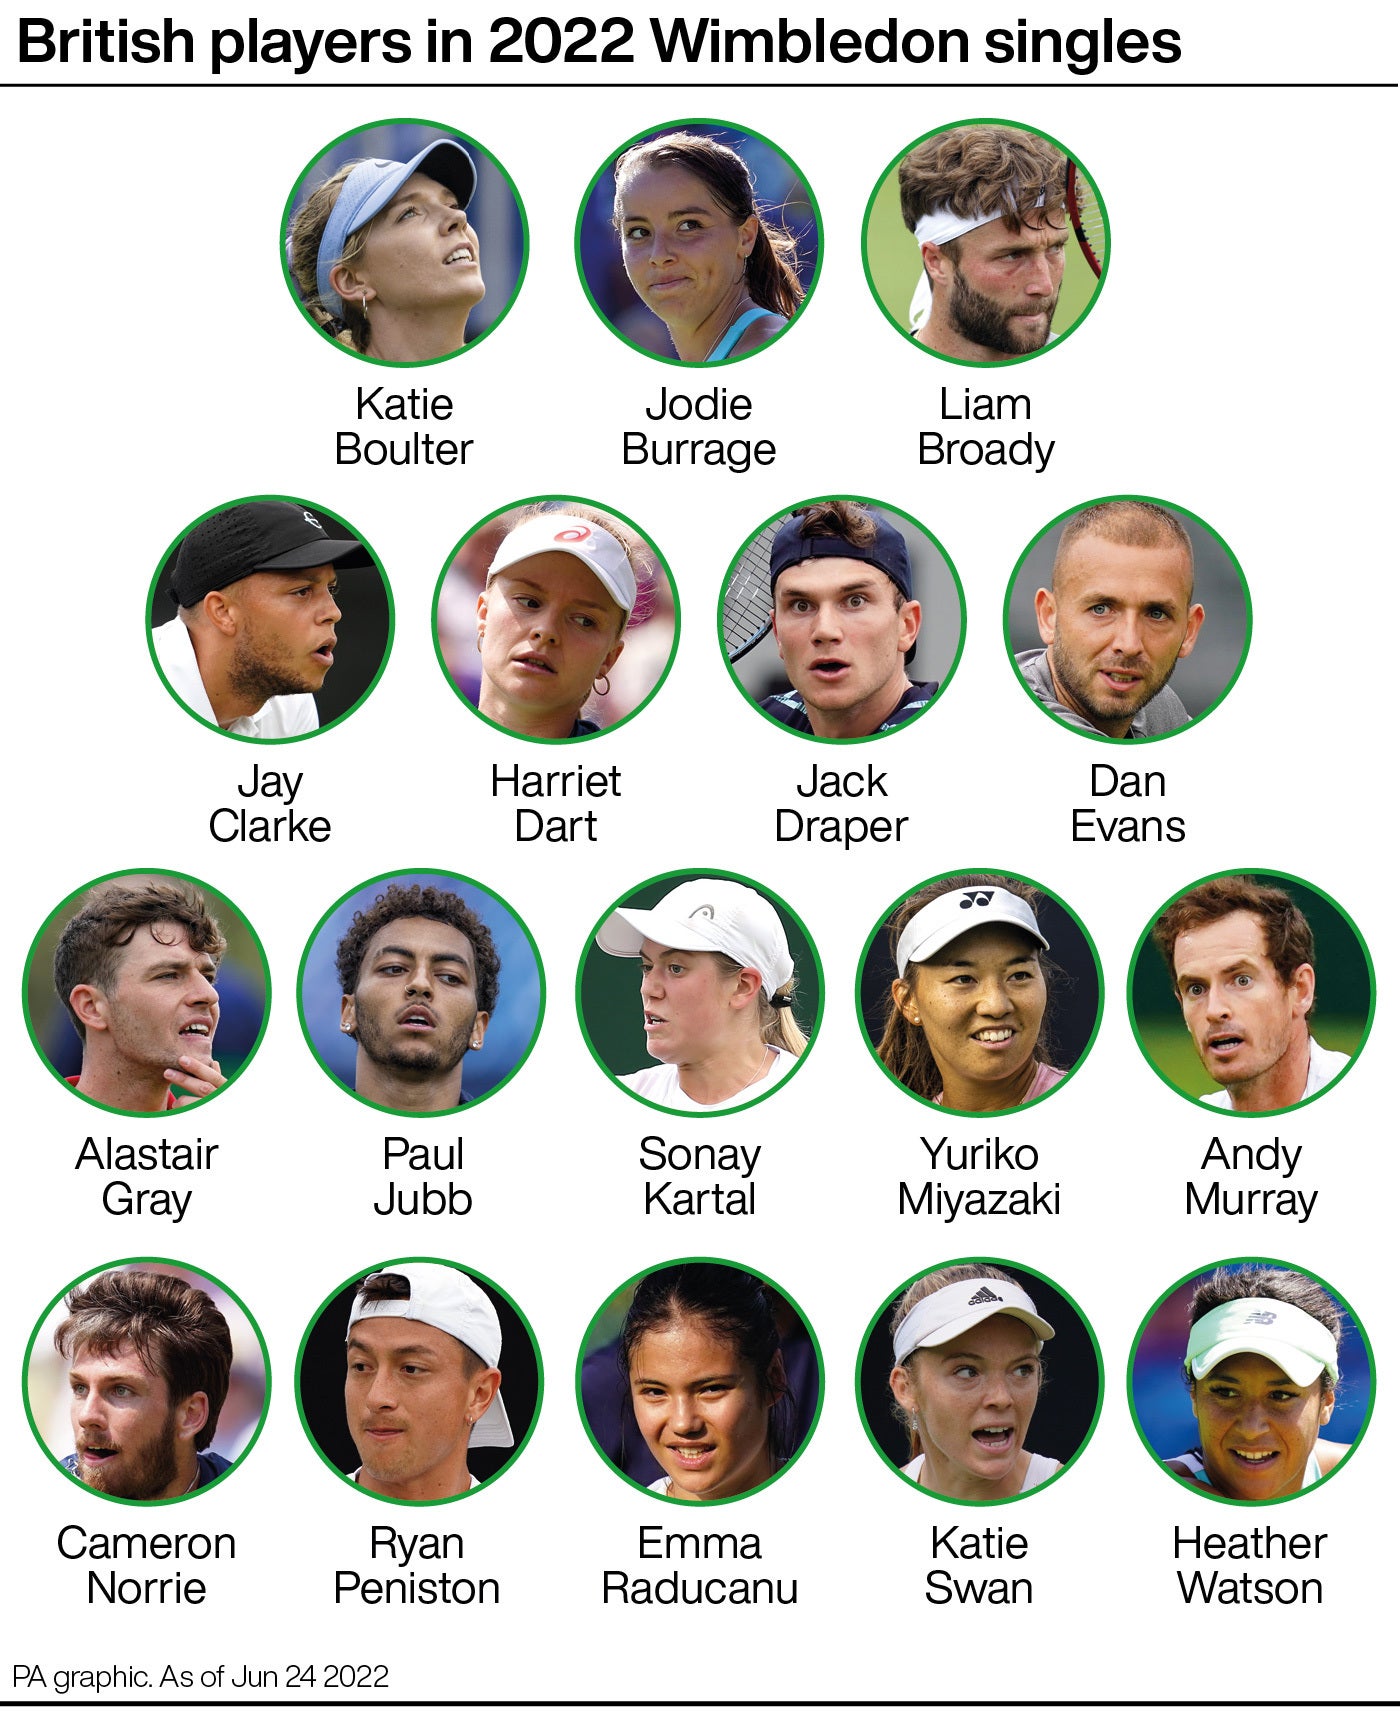 British players in 2022 Wimbledon singles (PA graphic)